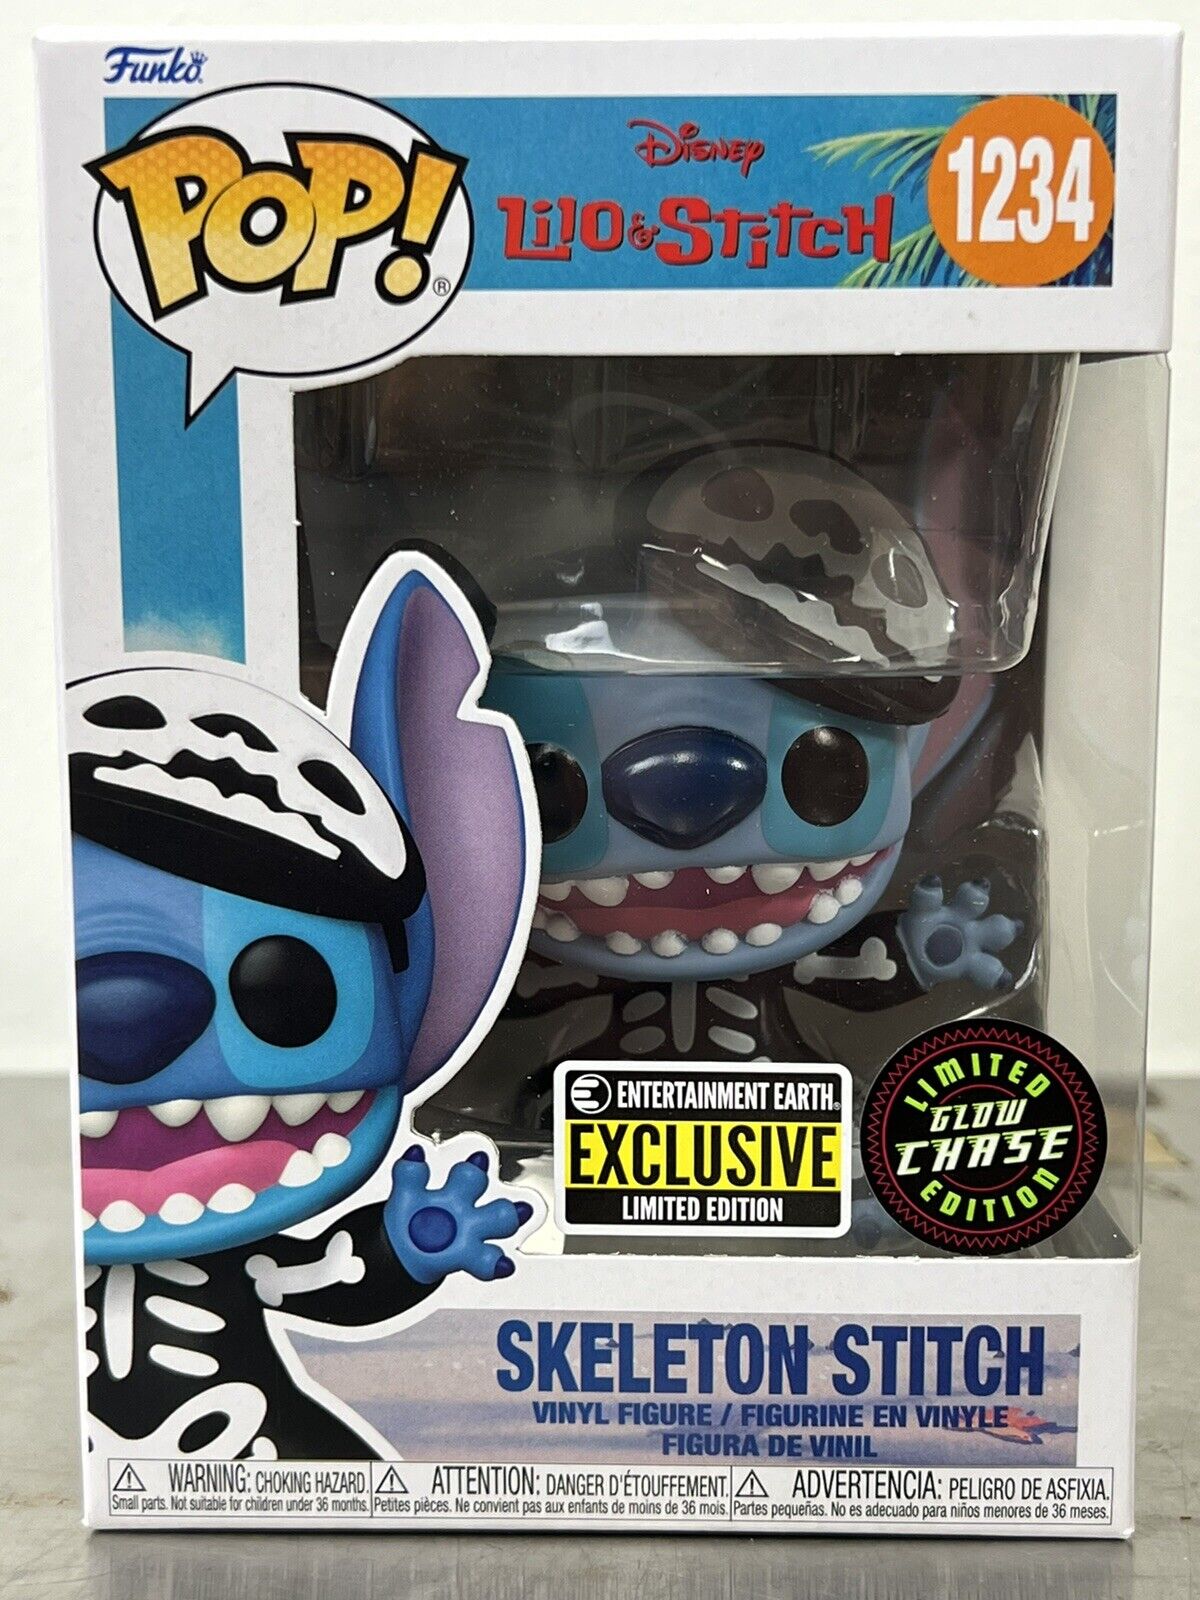 Funko POP Lilo & Stitch Skeleton Stitch EE Exclusive CHASE - Mint in Protector